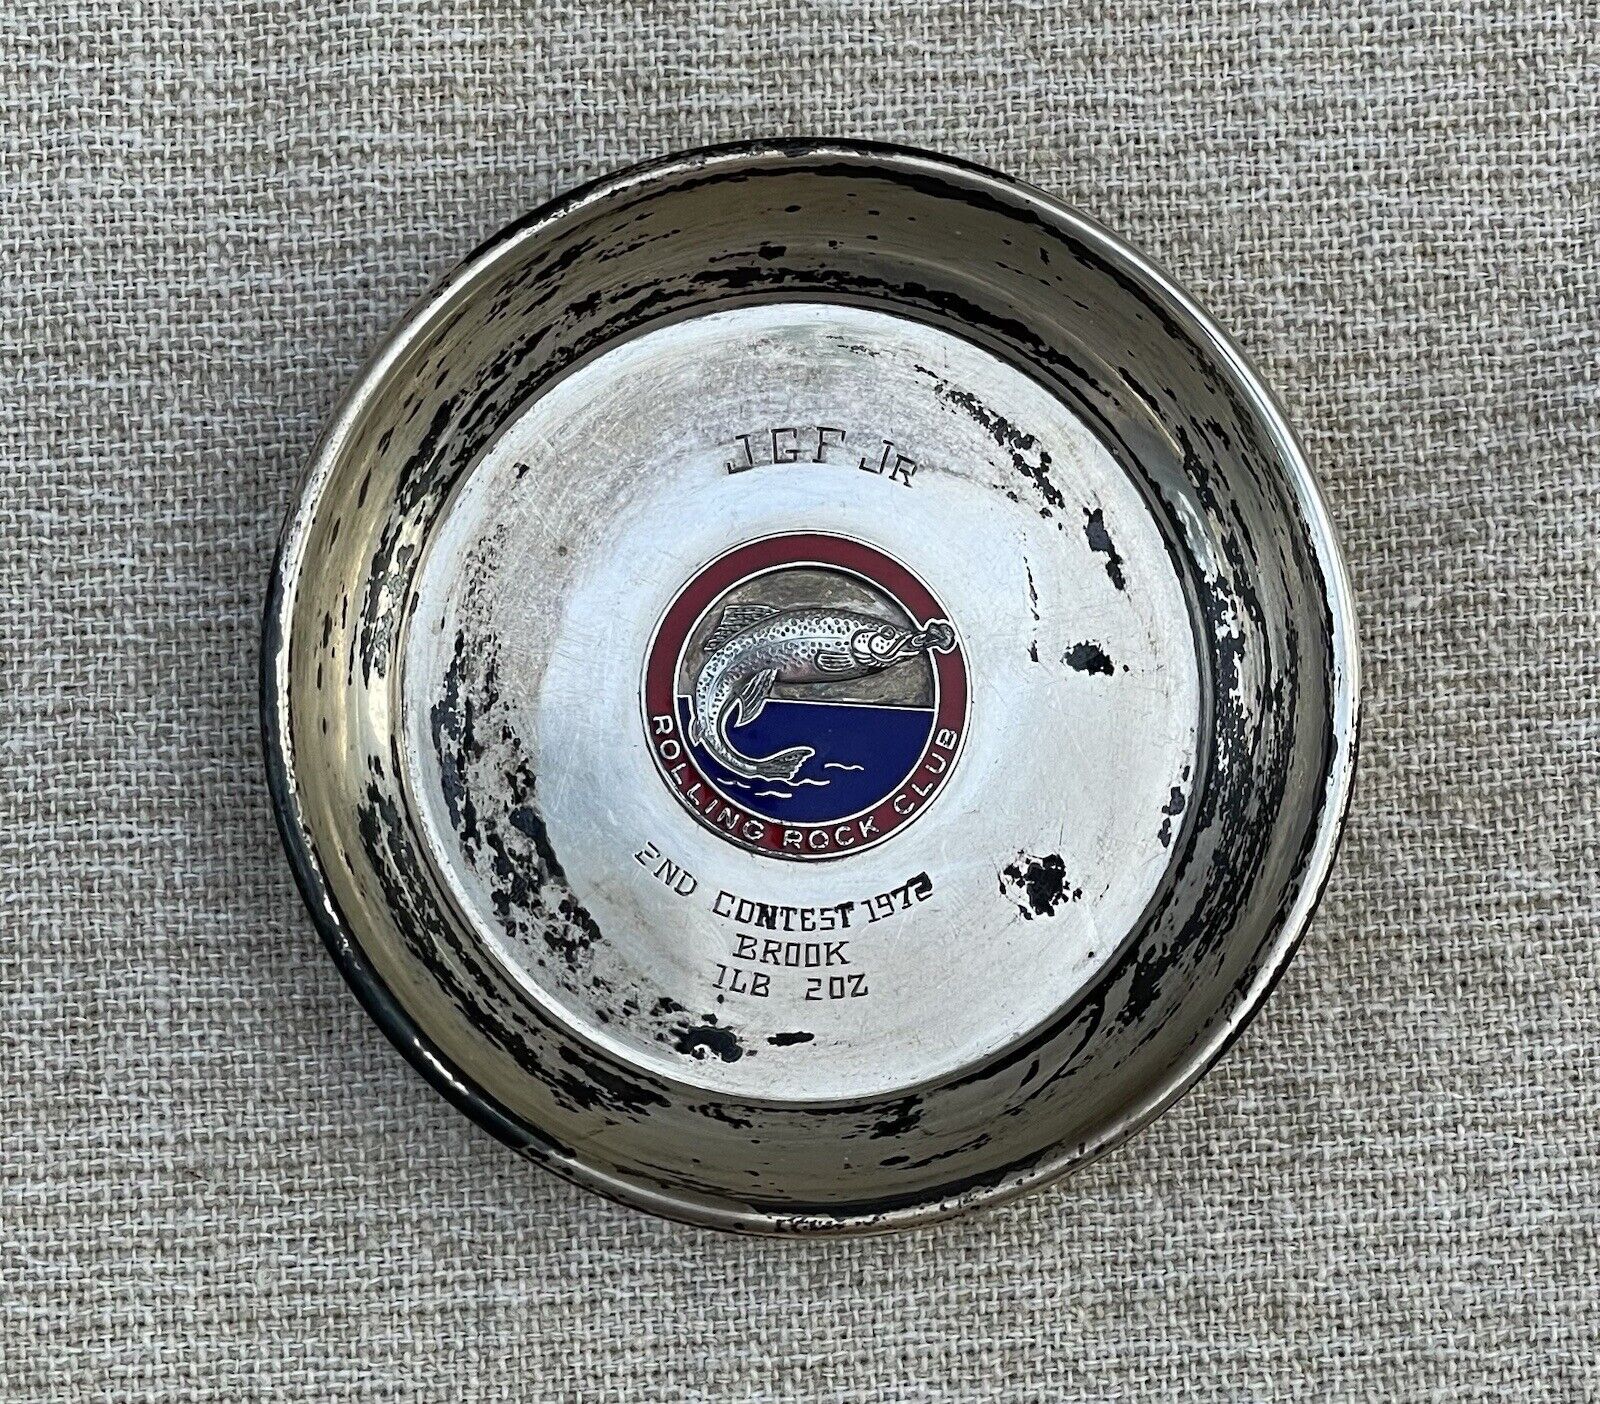 Rolling Rock Club Sterling Silver and Enamel Brook Trout Fishing Award Trophy